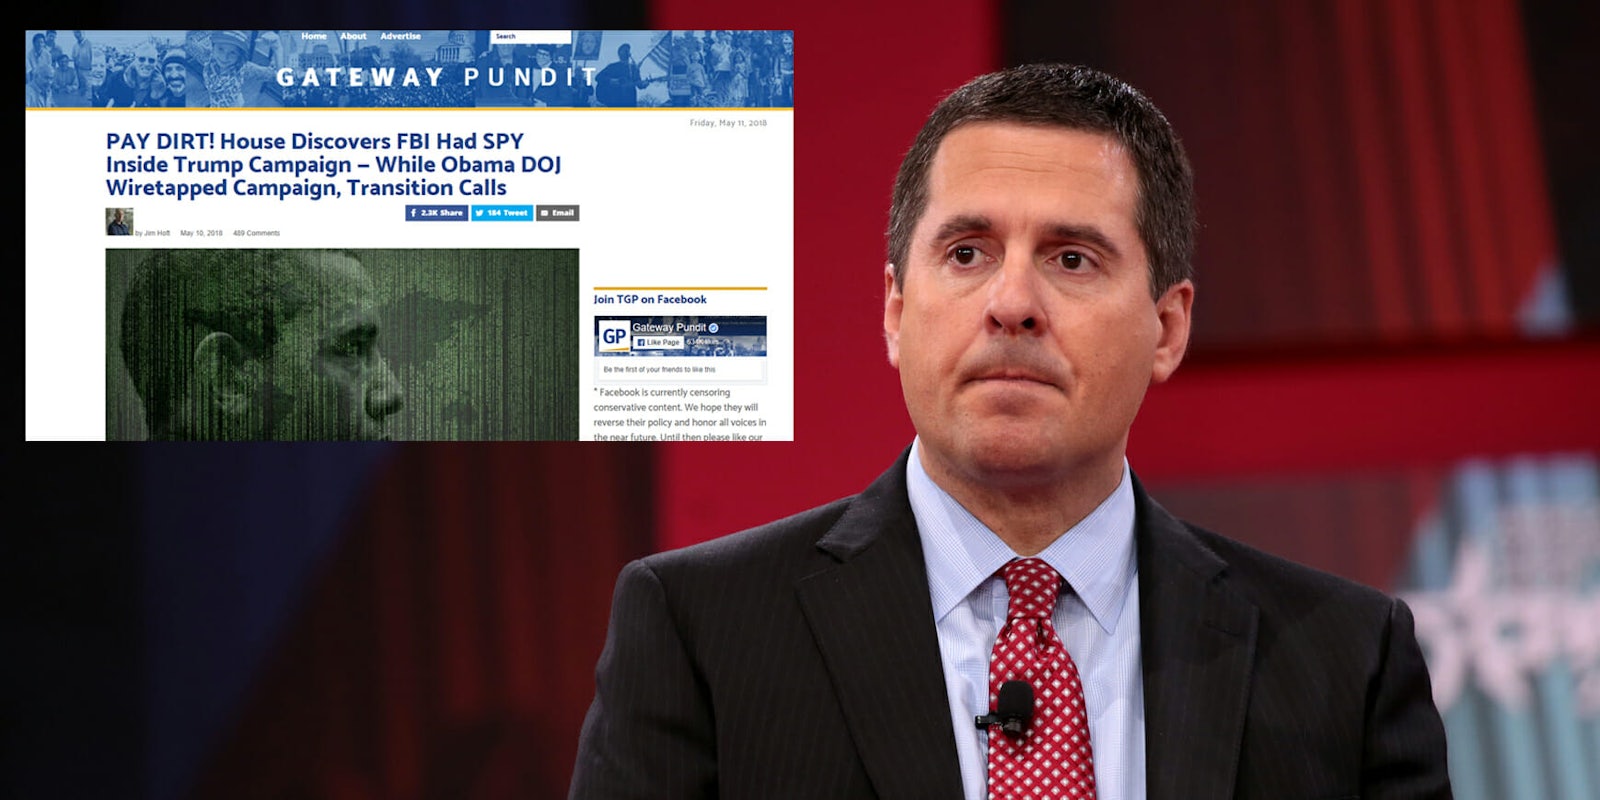 Right wing websites and personalities online are fretting over a 'secret intelligence source' that the intelligence communities don't want Rep. Devin Nunes to know about.